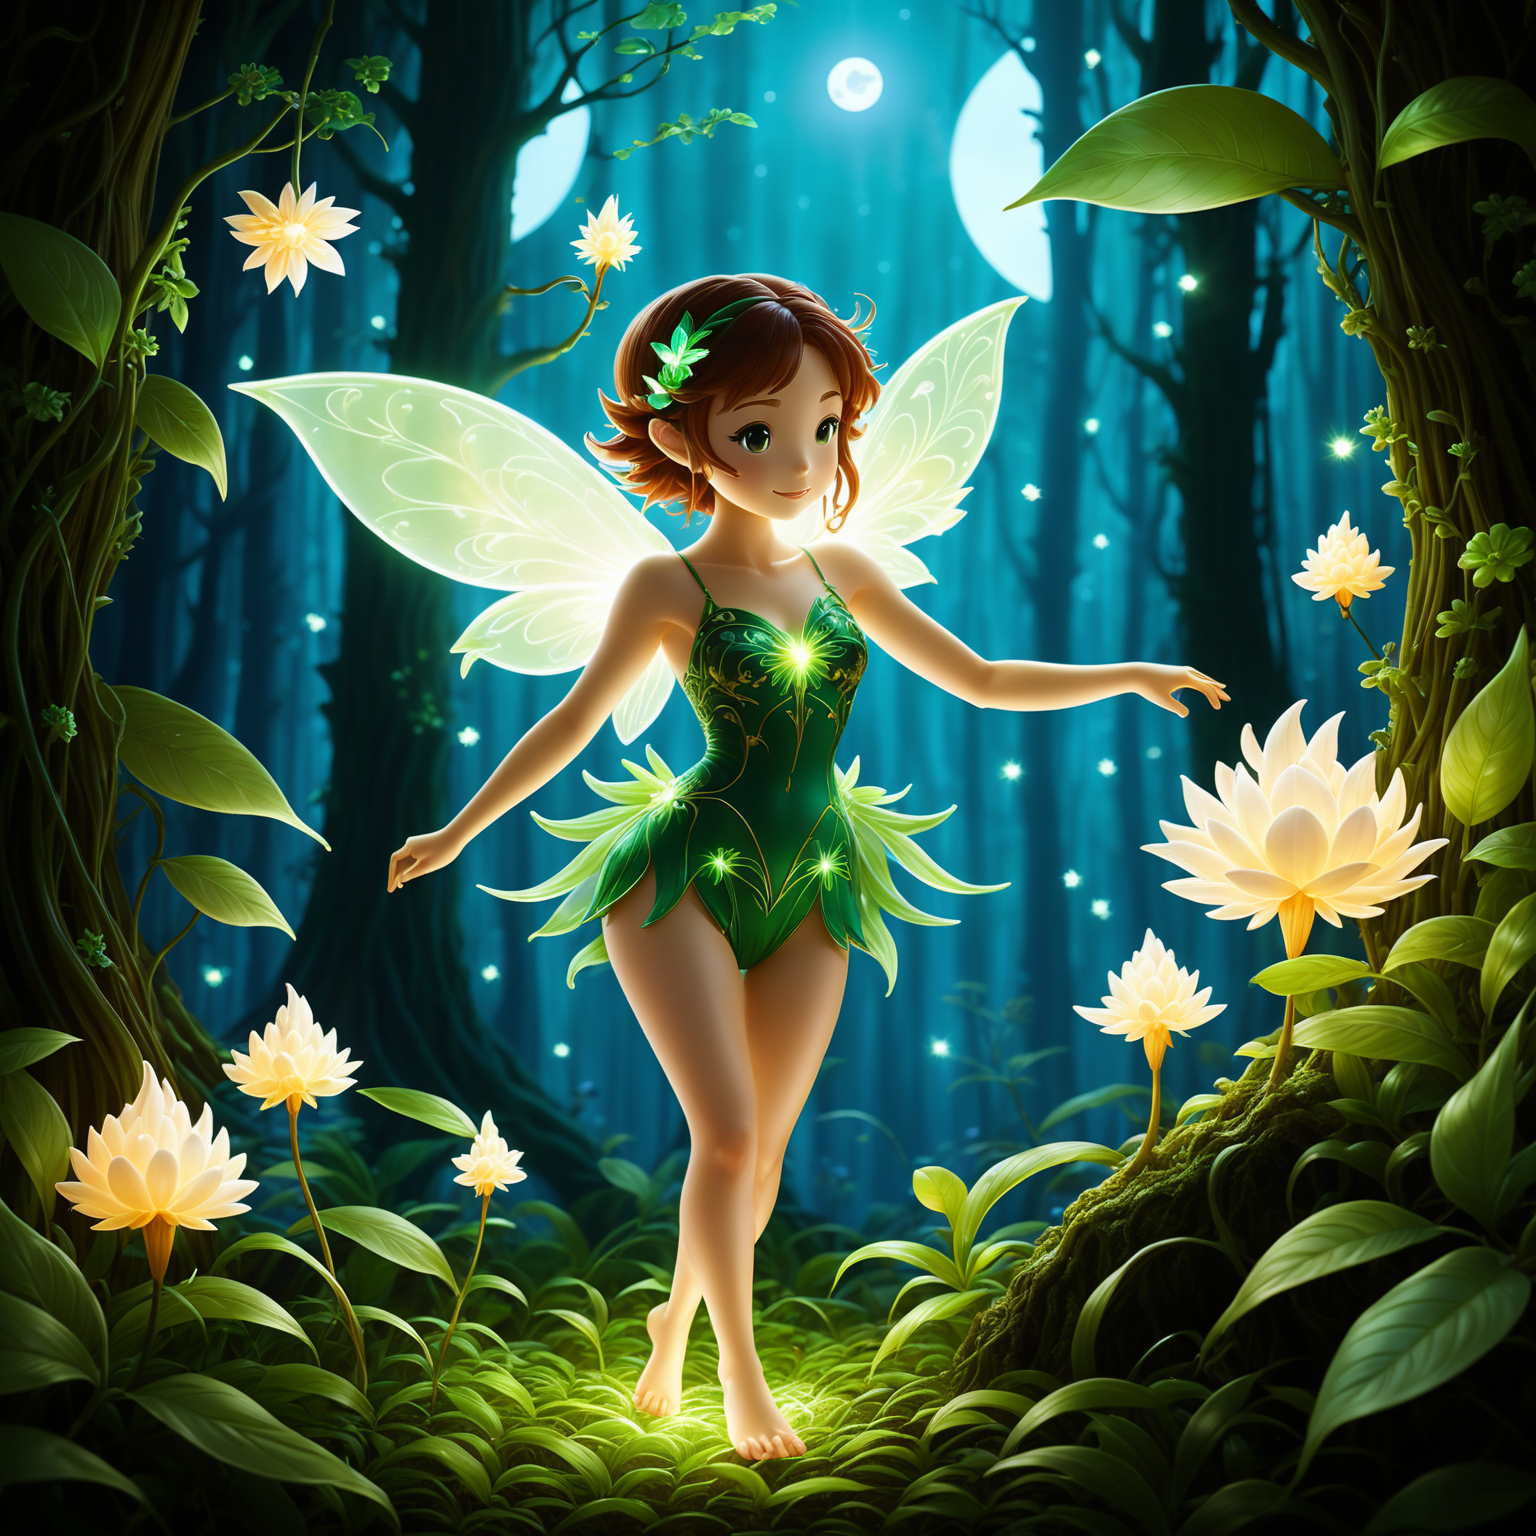 Glowing Forest Sprite, dancing in a lush forest bathed in moonlight. The sprite's soft glow illuminates the intricate deta...